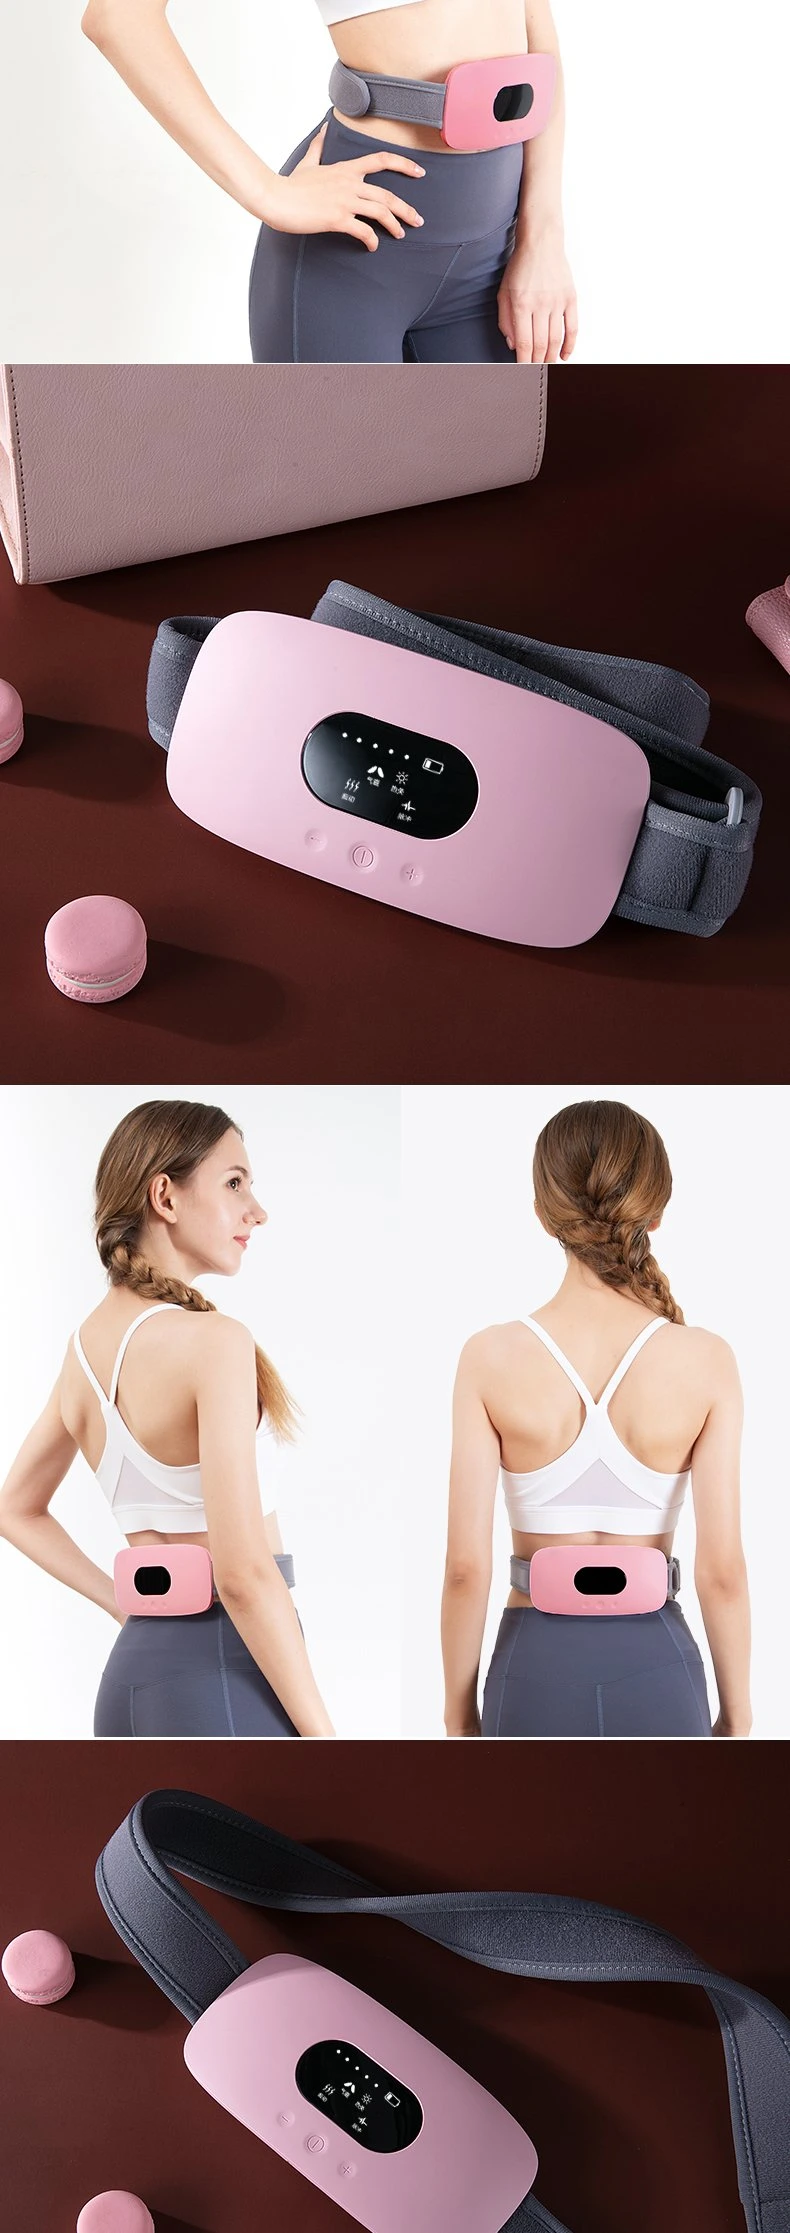 China Supplier Infrared Heating Vibrating Belt Warm Moxibustion Abdominal Massager for Stomach Ach Relief